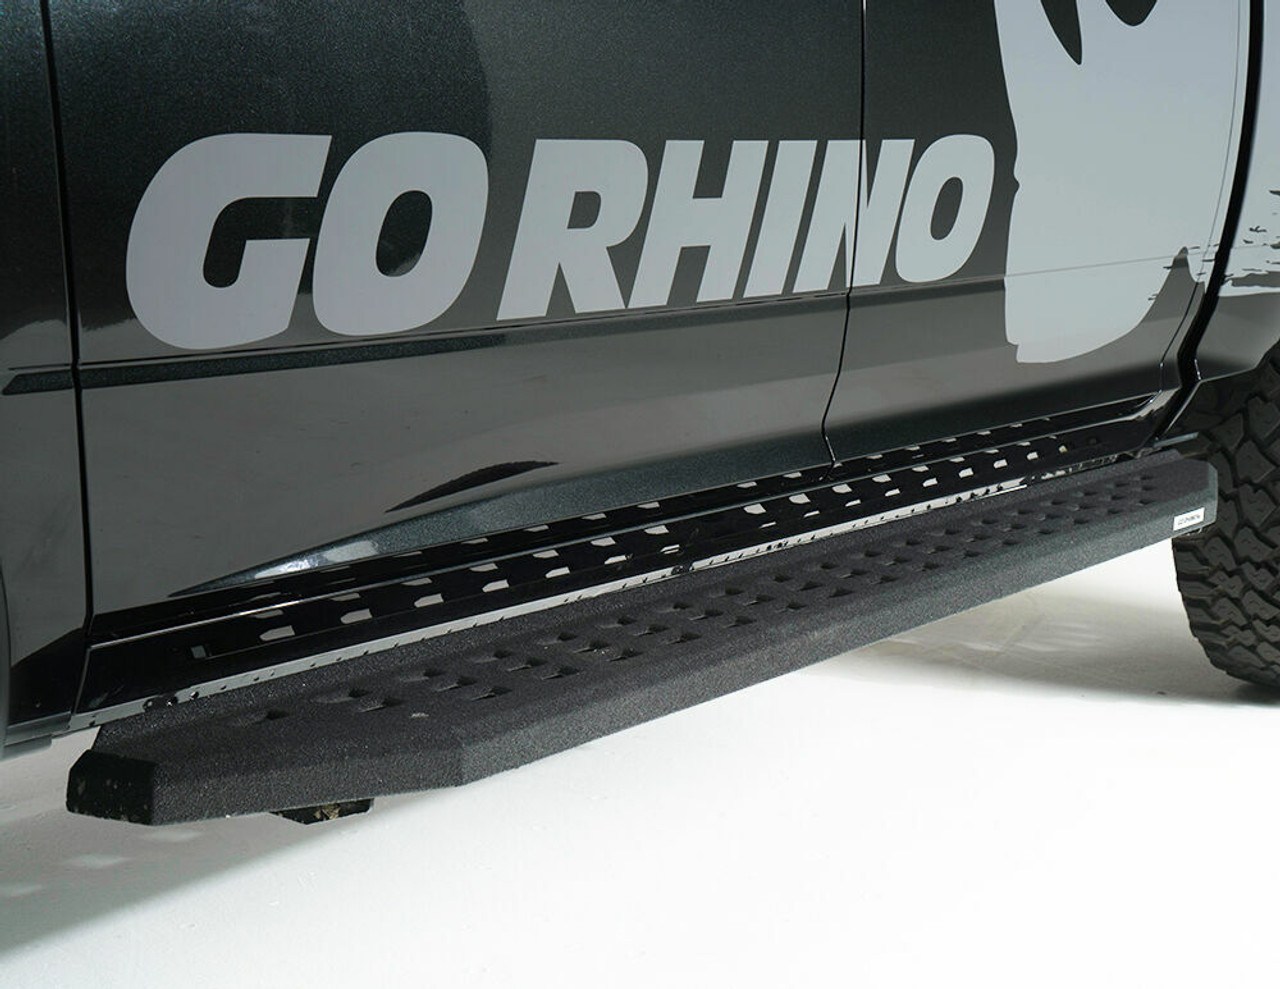 Go Rhino 6940428020PC Chevrolet, Silverado 2500HD, 3500HD, 2015 - 2019, RB20 Running boards - Complete Kit: 2 pair RB20 Drop Steps, Galvanized Steel, Textured black, 69400080PC RB20 + 6940425 RB Brackets + (2) 69420000PC Drop Step, Diesel Only